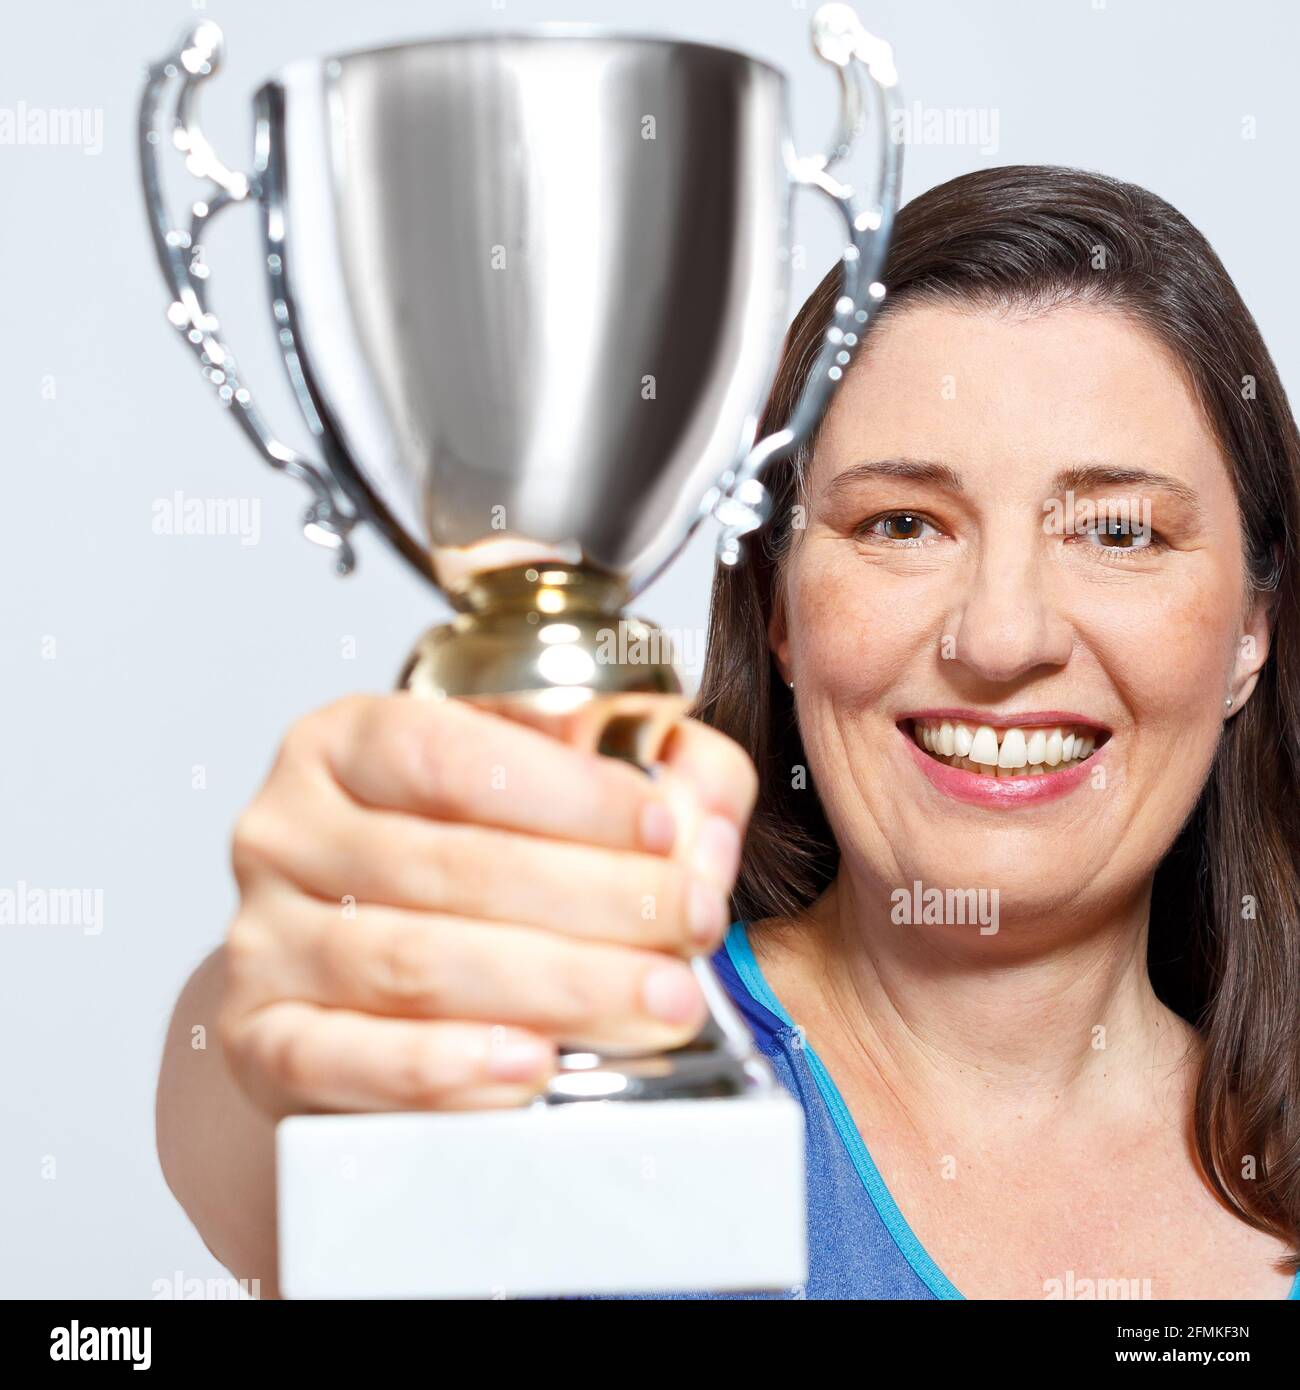 Proud smiling middle aged woman holding up a silver cup trophy, enjoying her sports achievement. Stock Photo